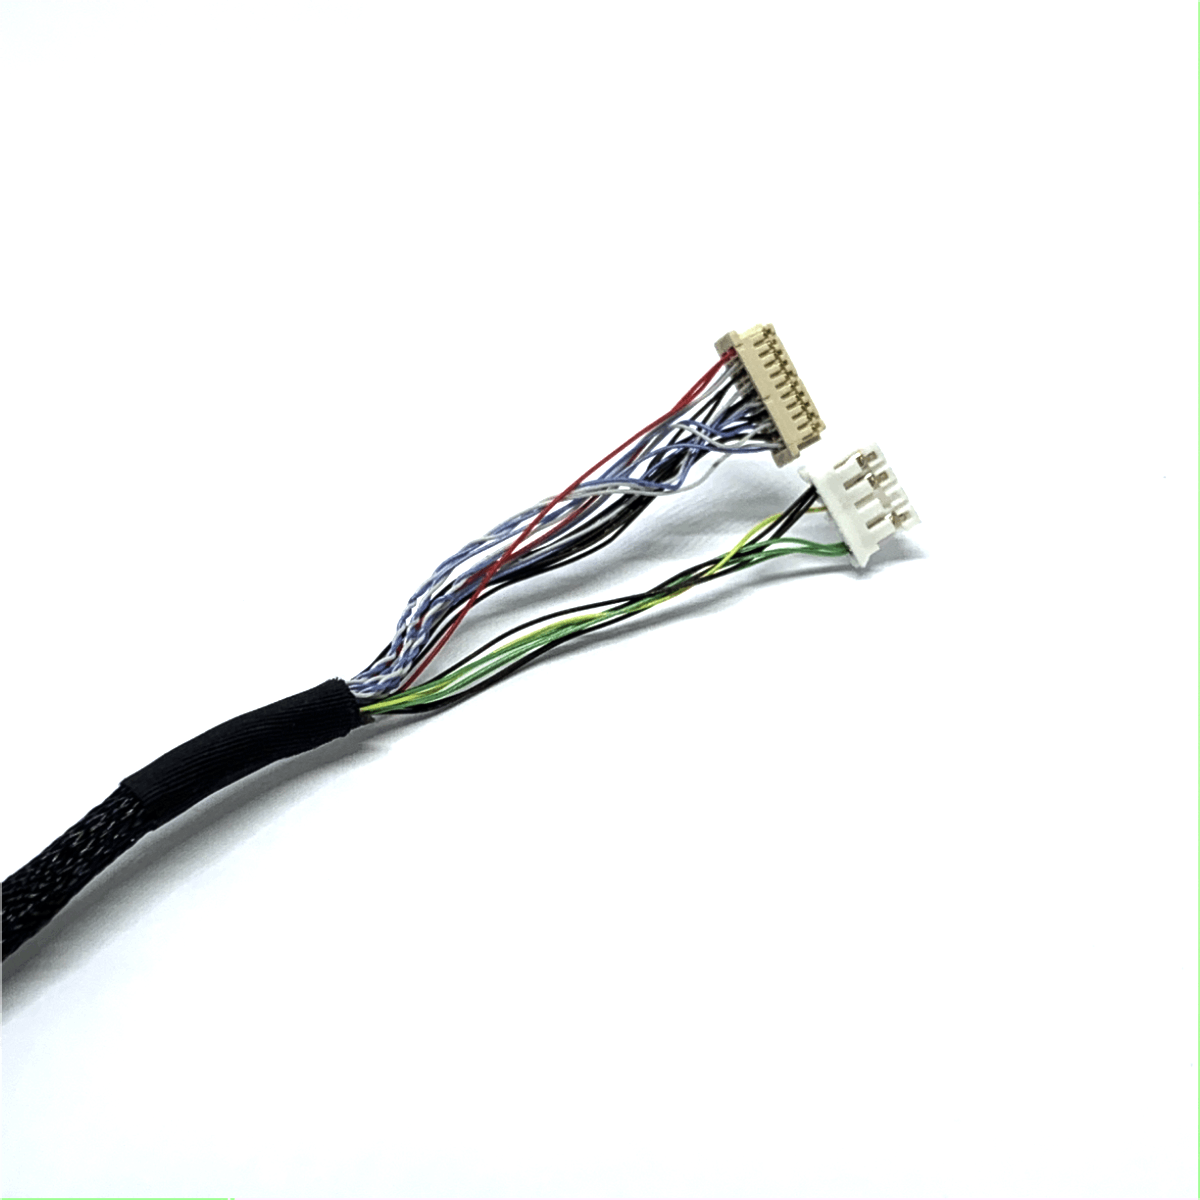 LVDS Cable